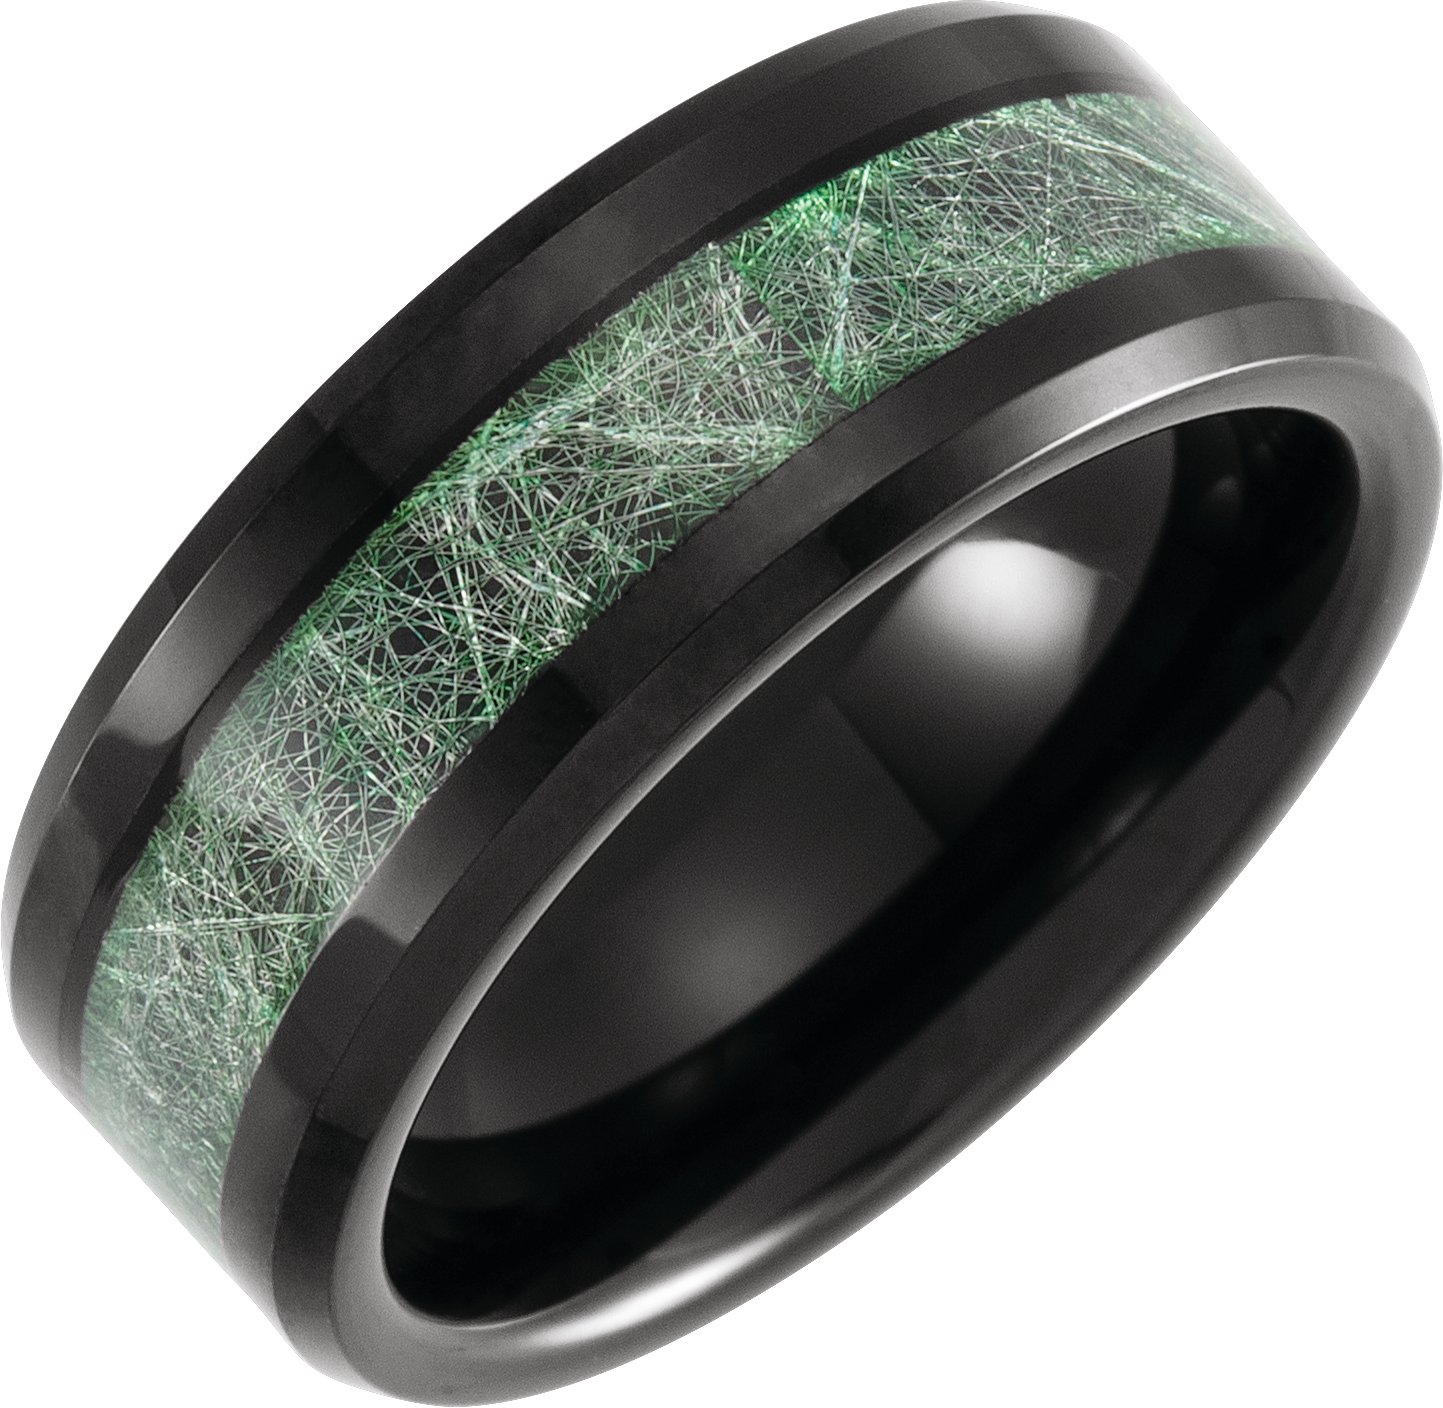 Tungsten 8 mm Beveled Band with Imitation Meteorite Inlay Size 12